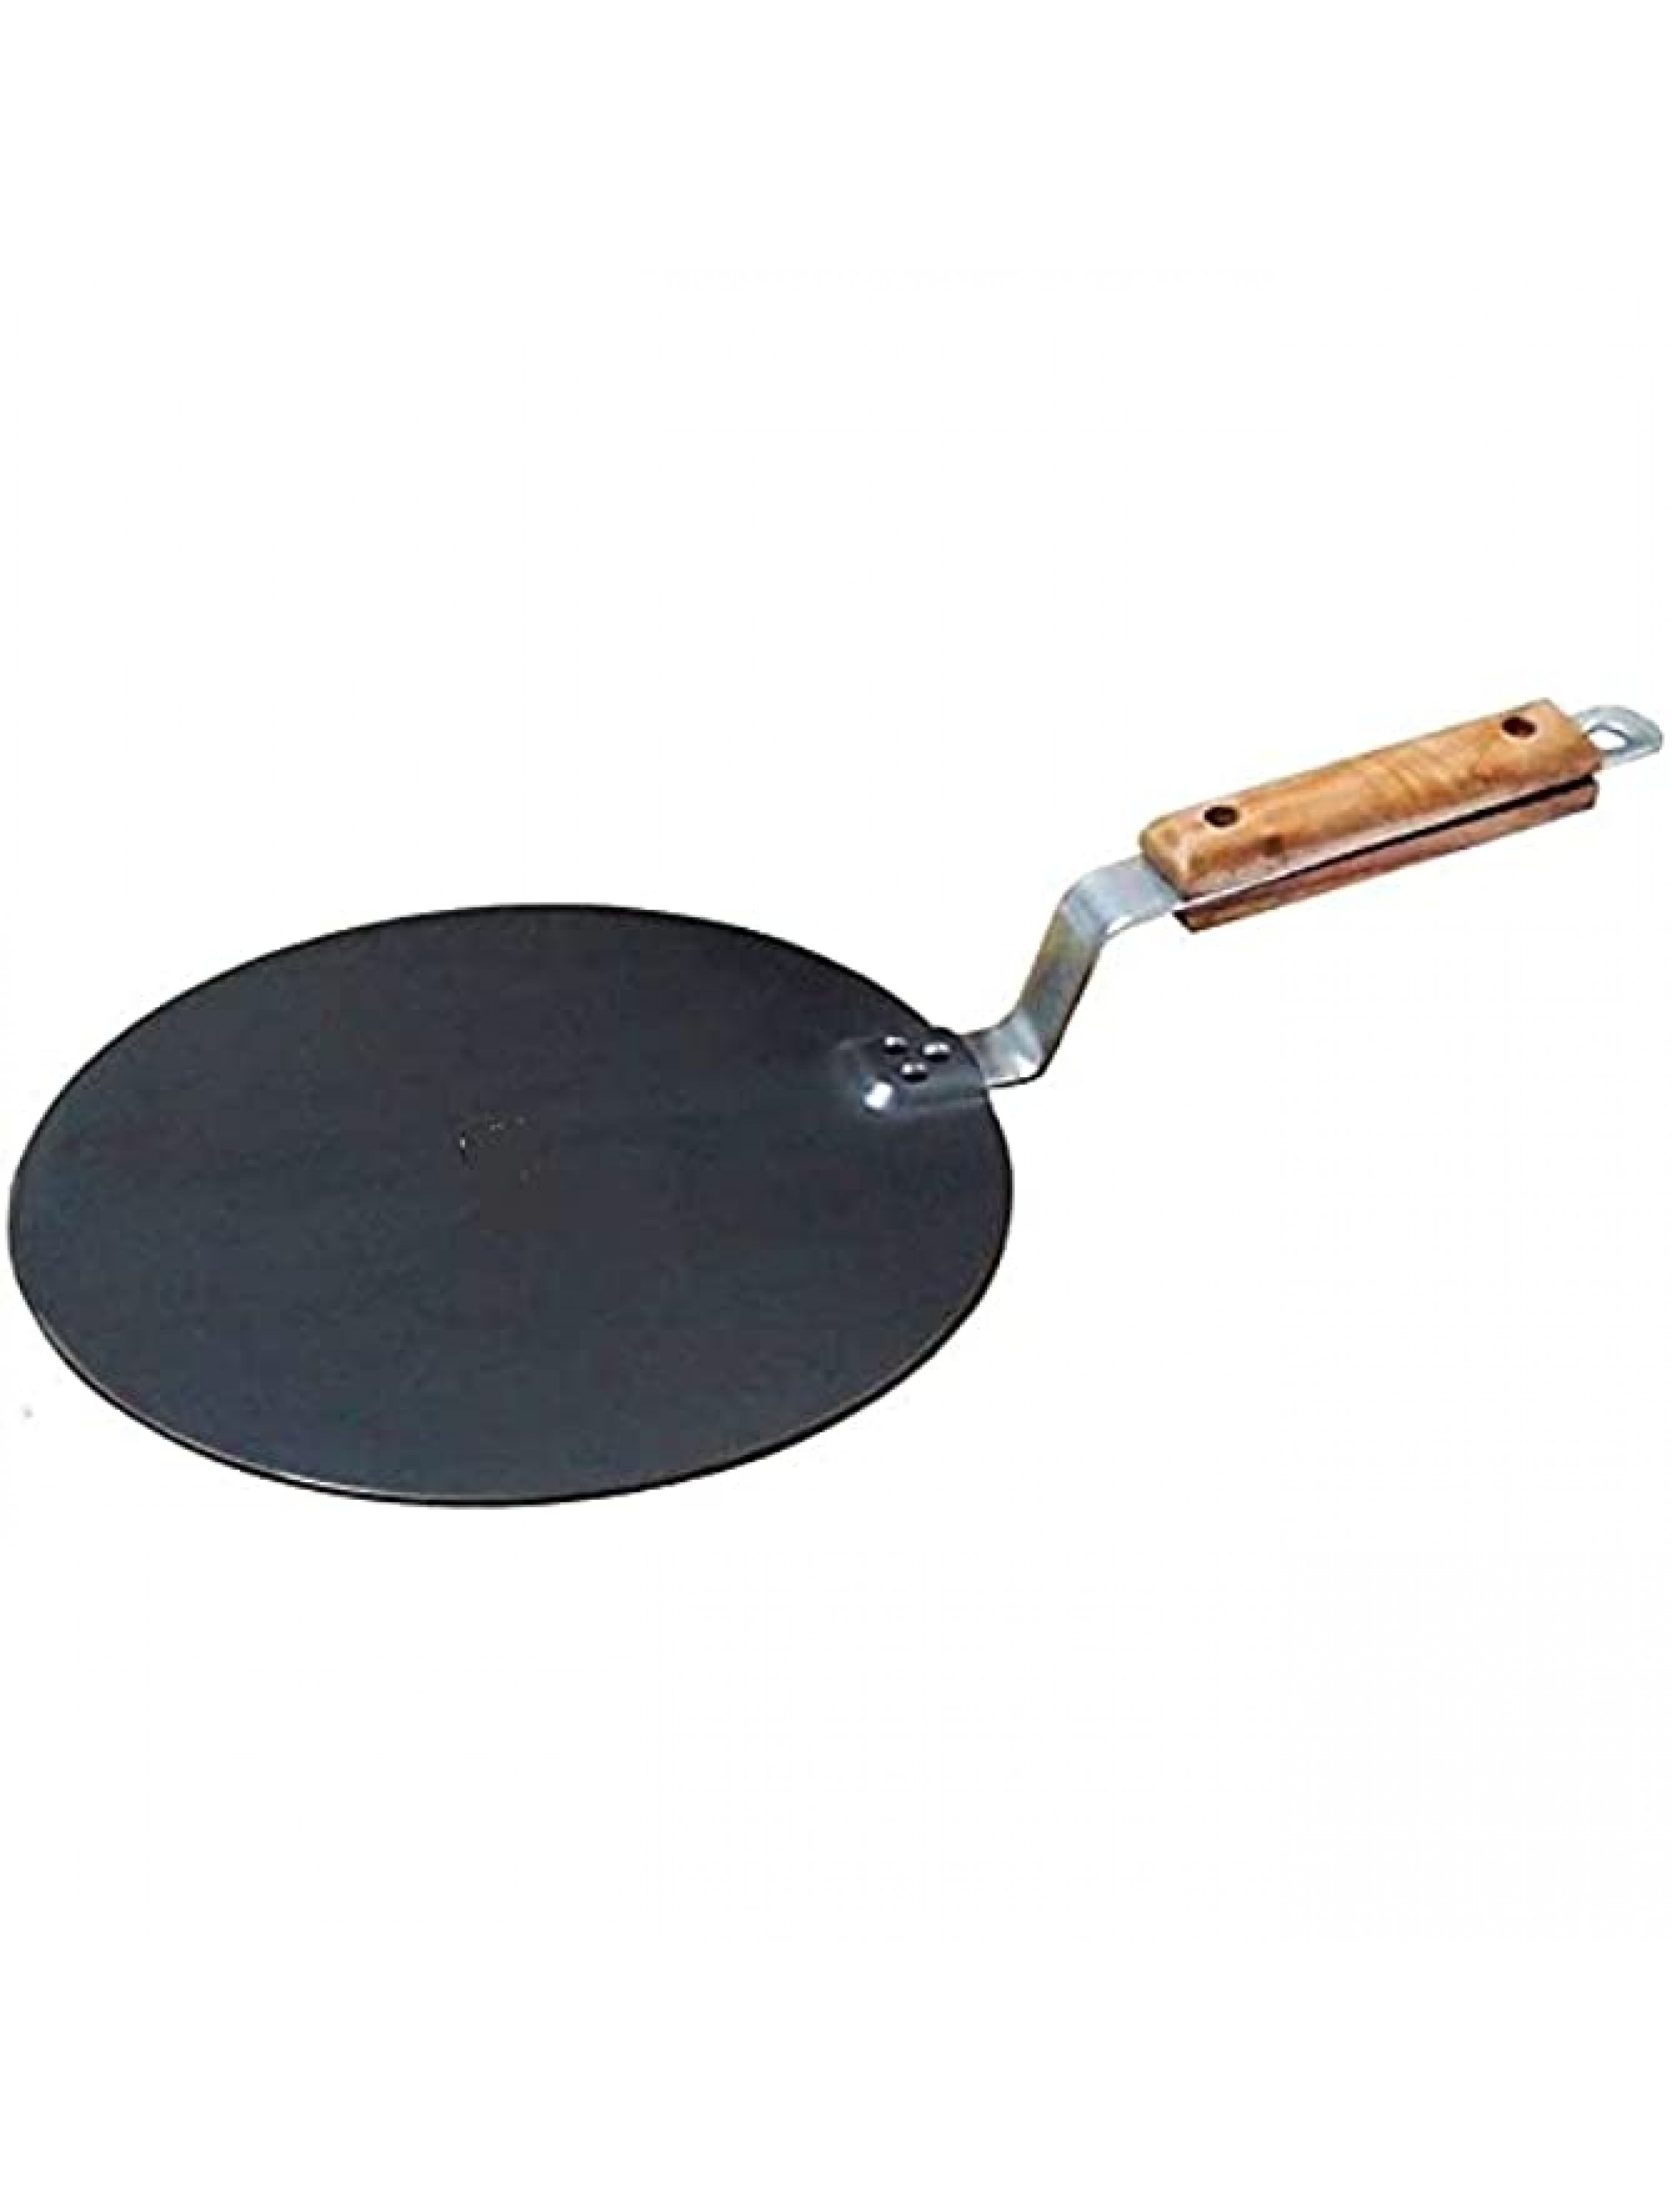 12 Flat Iron Tava for Dosa Making Roti Making with Handle India Style Cooking Pan - B9WCHIR01